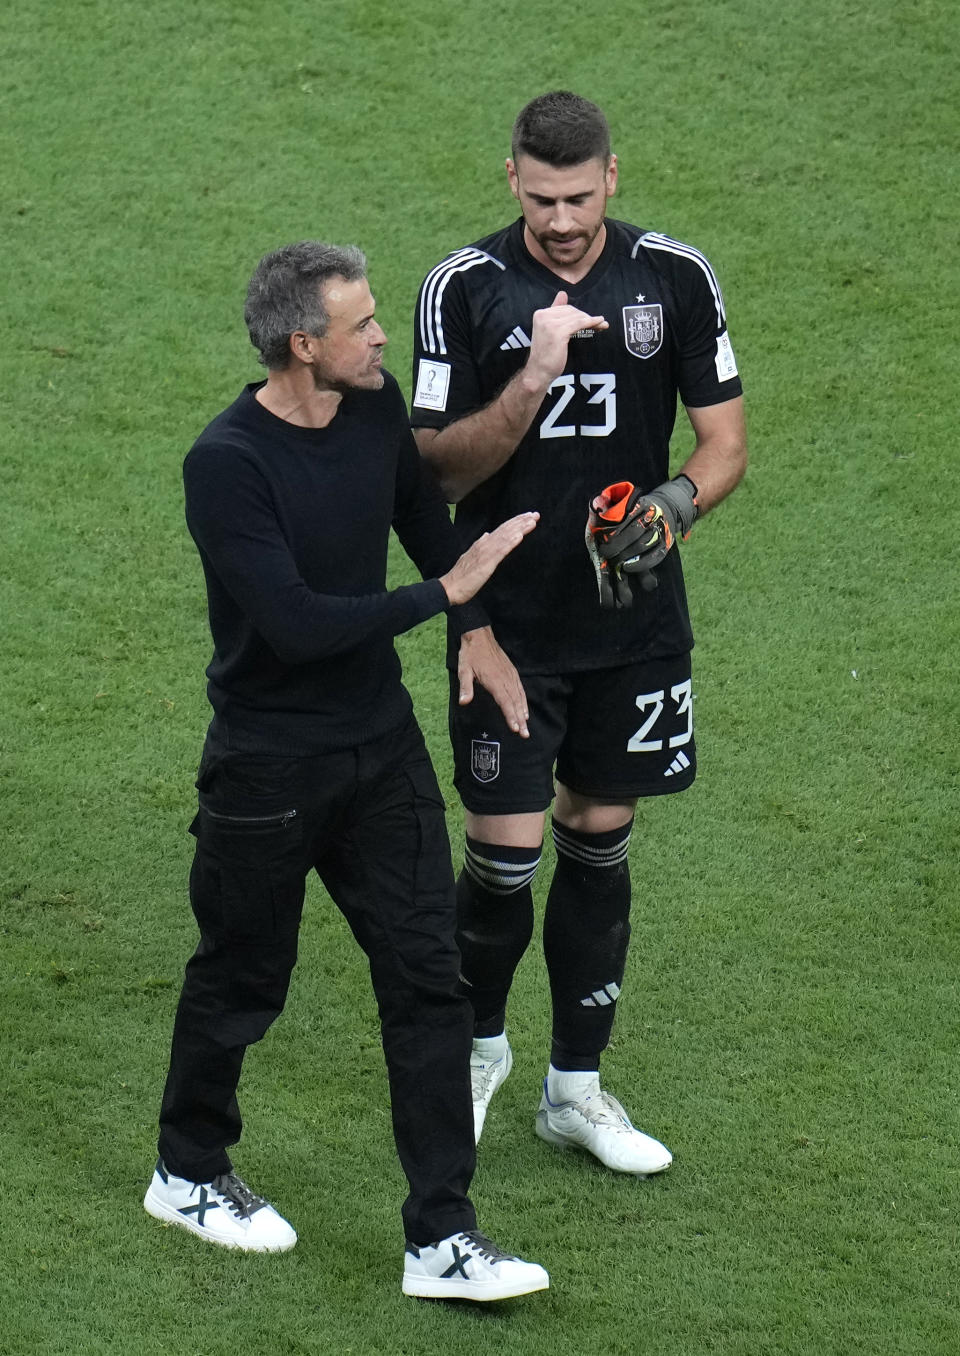 Spain's head coach Luis Enrique leaves the field with Spain's goalkeeper Unai Simon at the end of the World Cup group E soccer match between Spain and Germany, at the Al Bayt Stadium in Al Khor, Qatar, Sunday, Nov. 27, 2022. (AP Photo/Ricardo Mazalan)